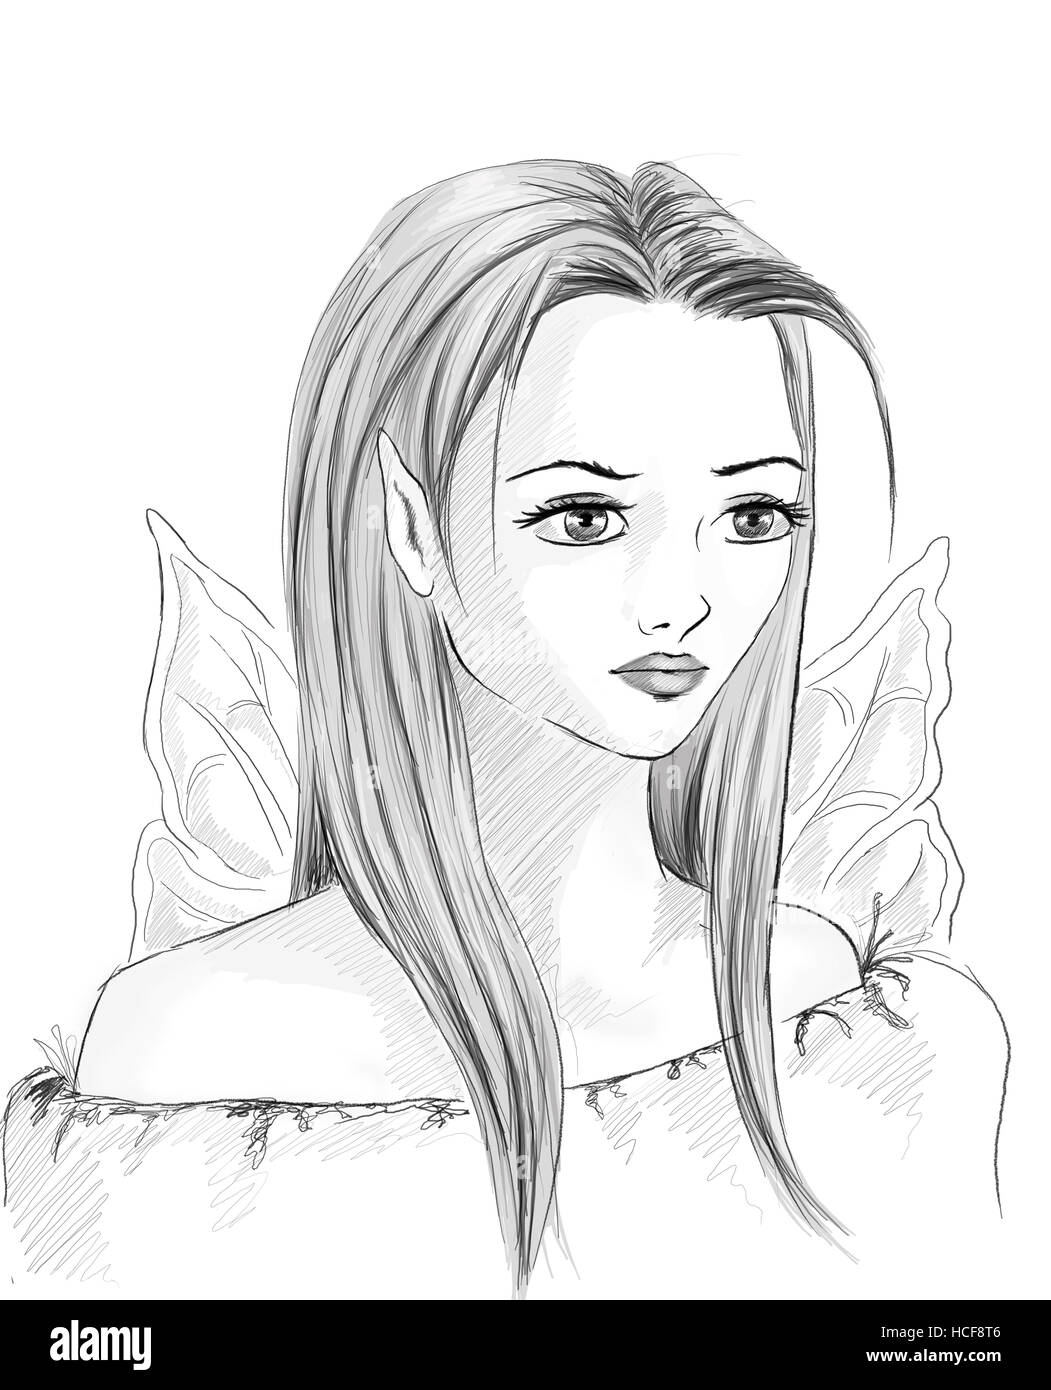 pencil sketch of a female elf done in comics style Stock Photo - Alamy